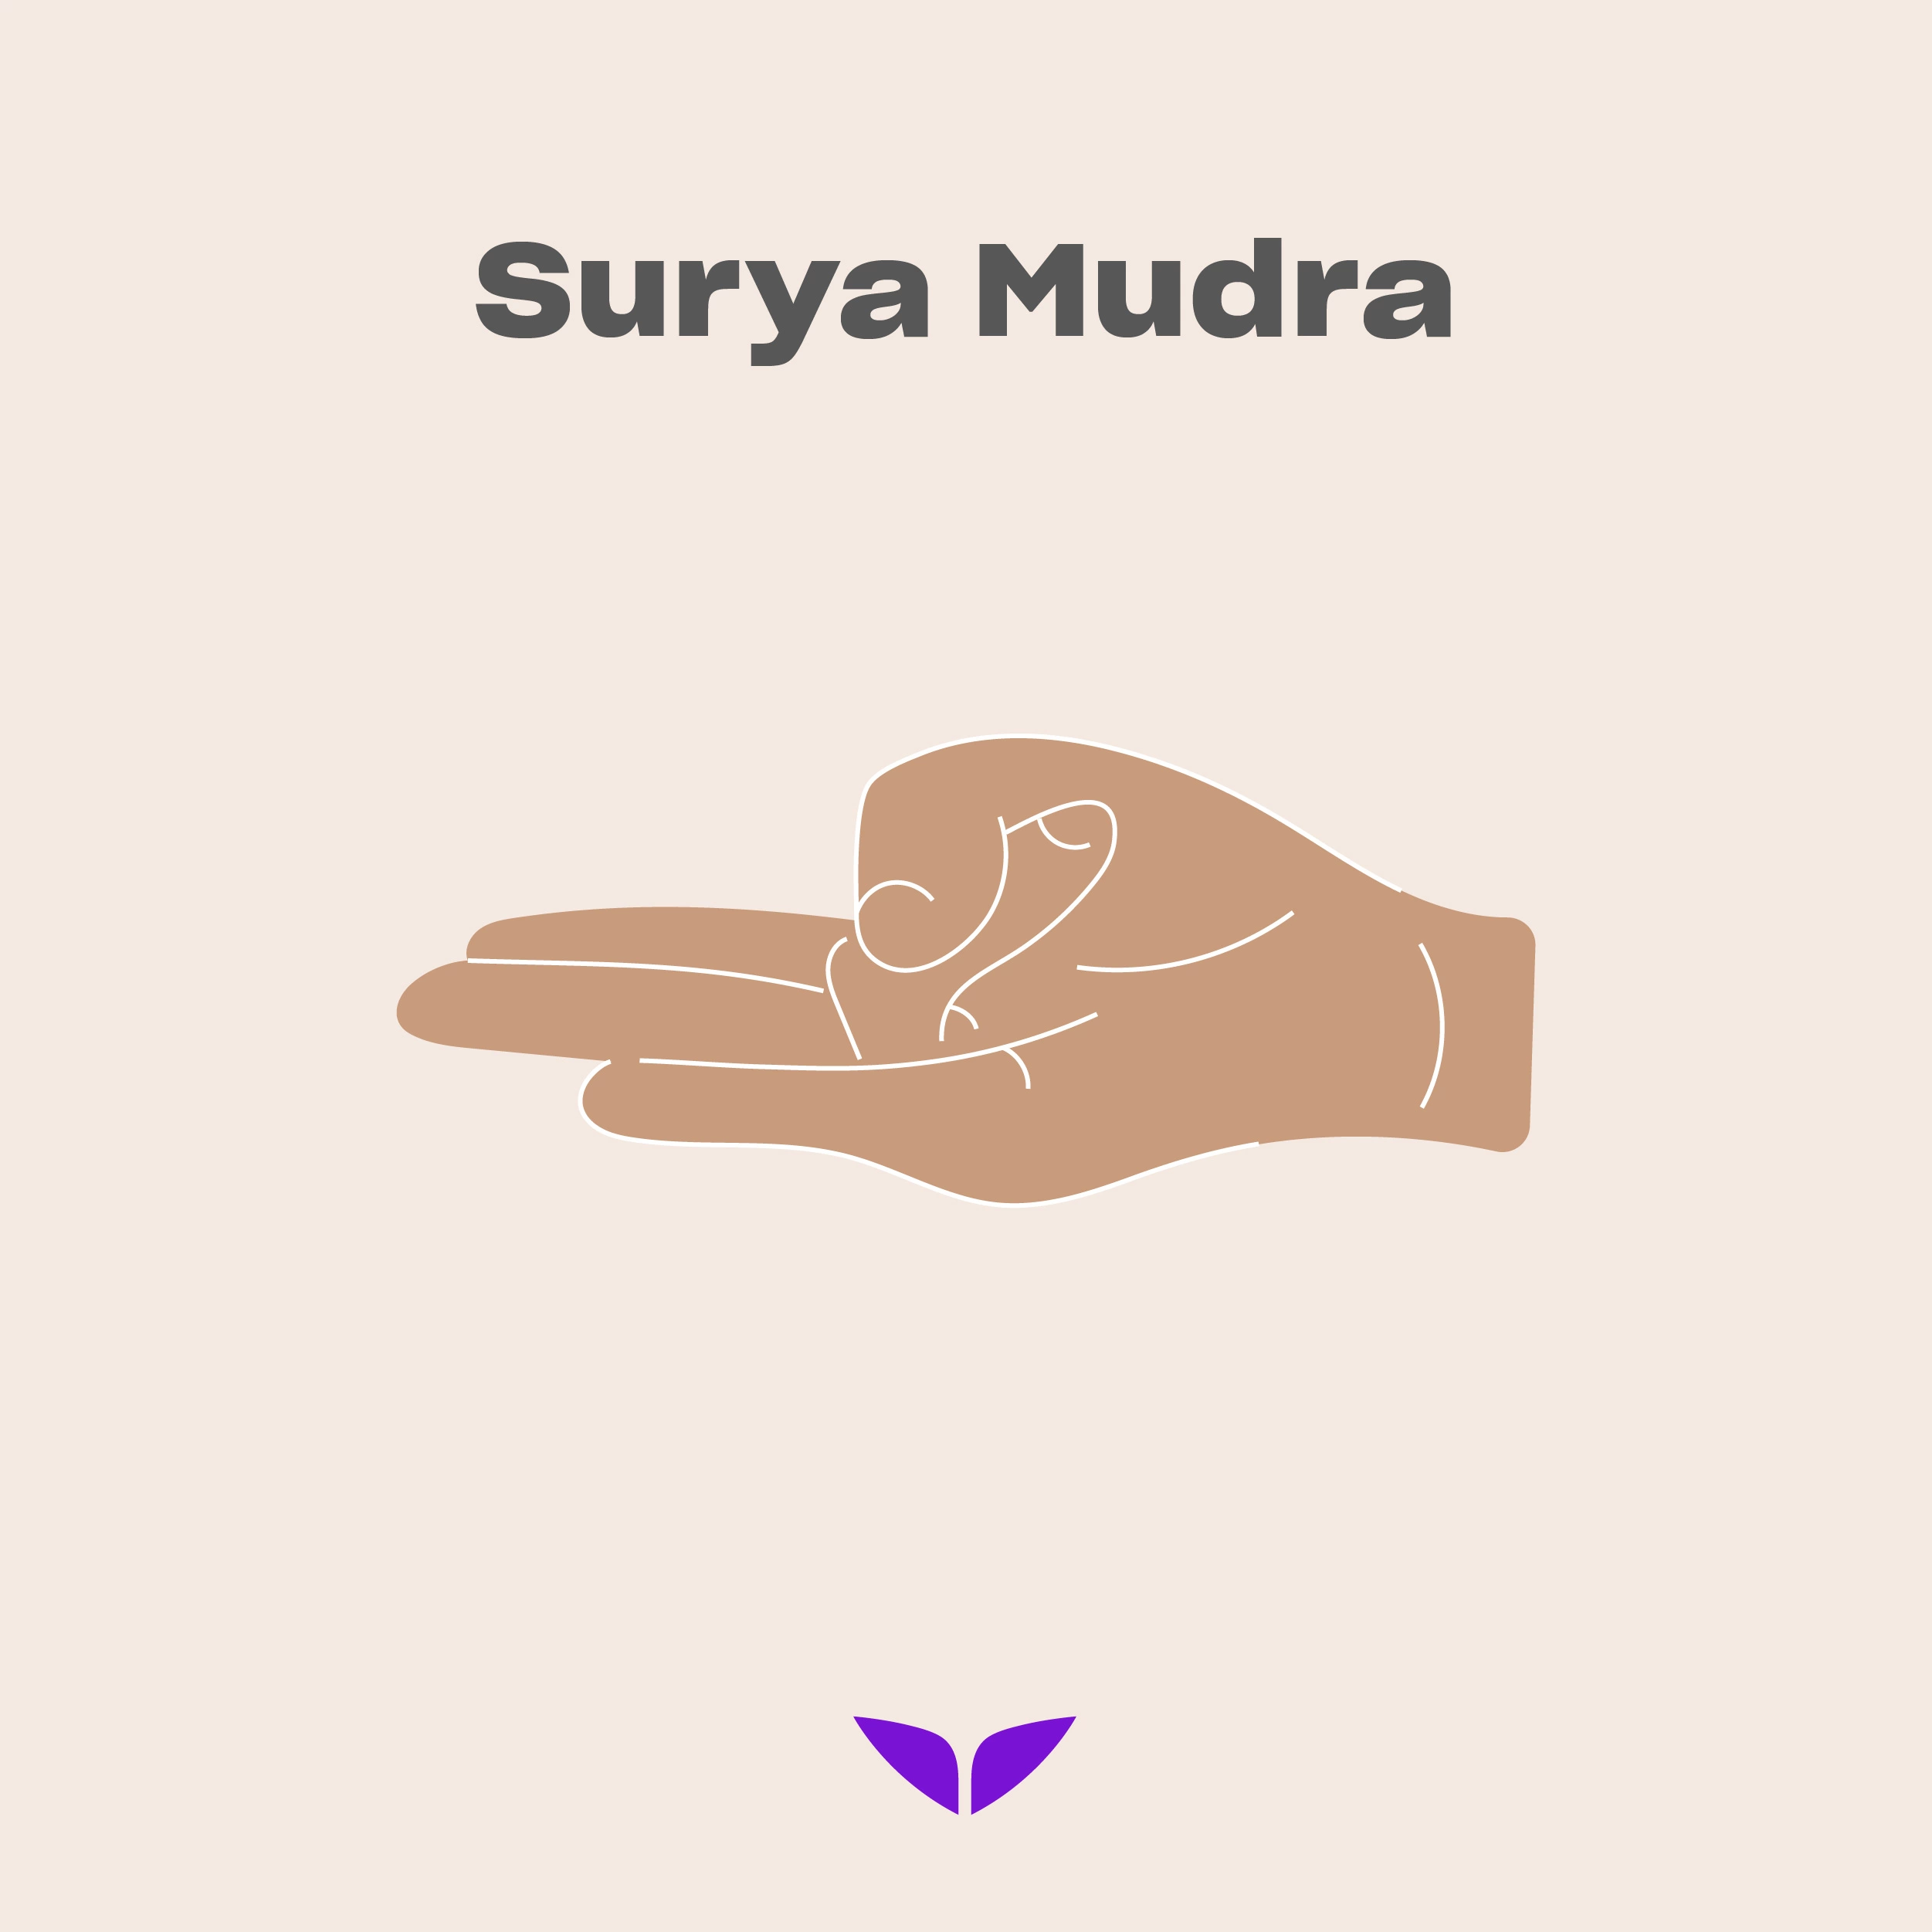 The Surya mudra: the seal of fire